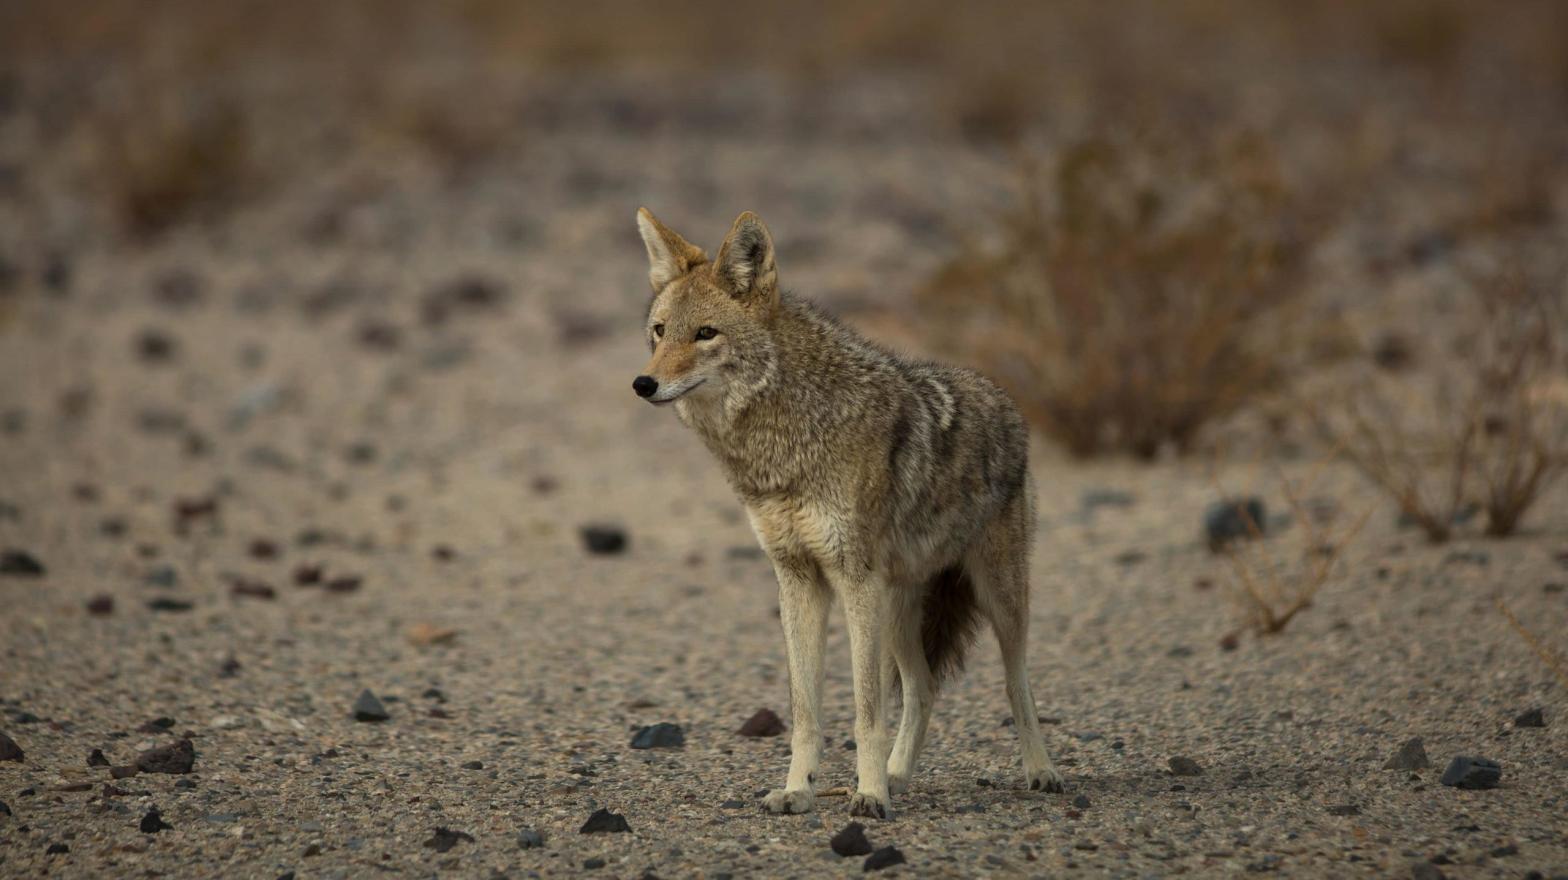 Among the animals the Wildlife Services program killed this year are 61,882 adult coyotes, plus an unknown number of coyote pups in 251 destroyed dens. (Photo: David McNew, Getty Images)